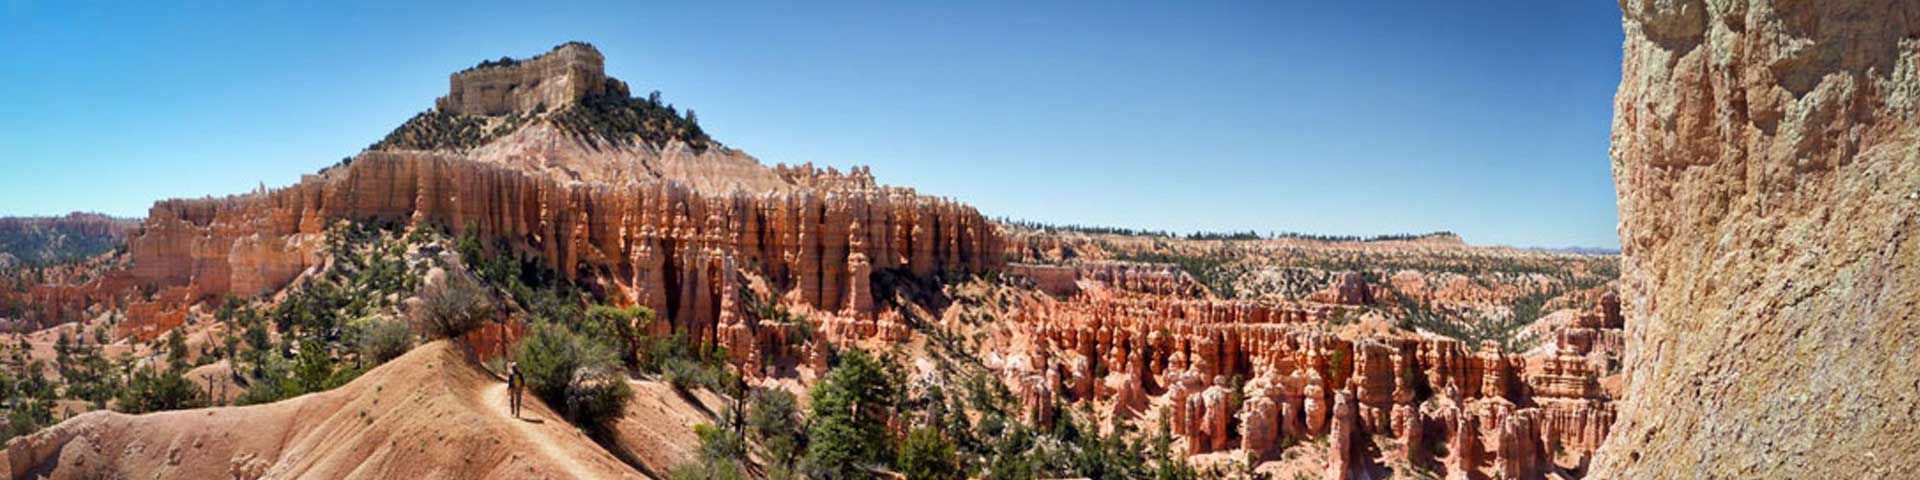 Hiking trail panorama in Bryce Canyon